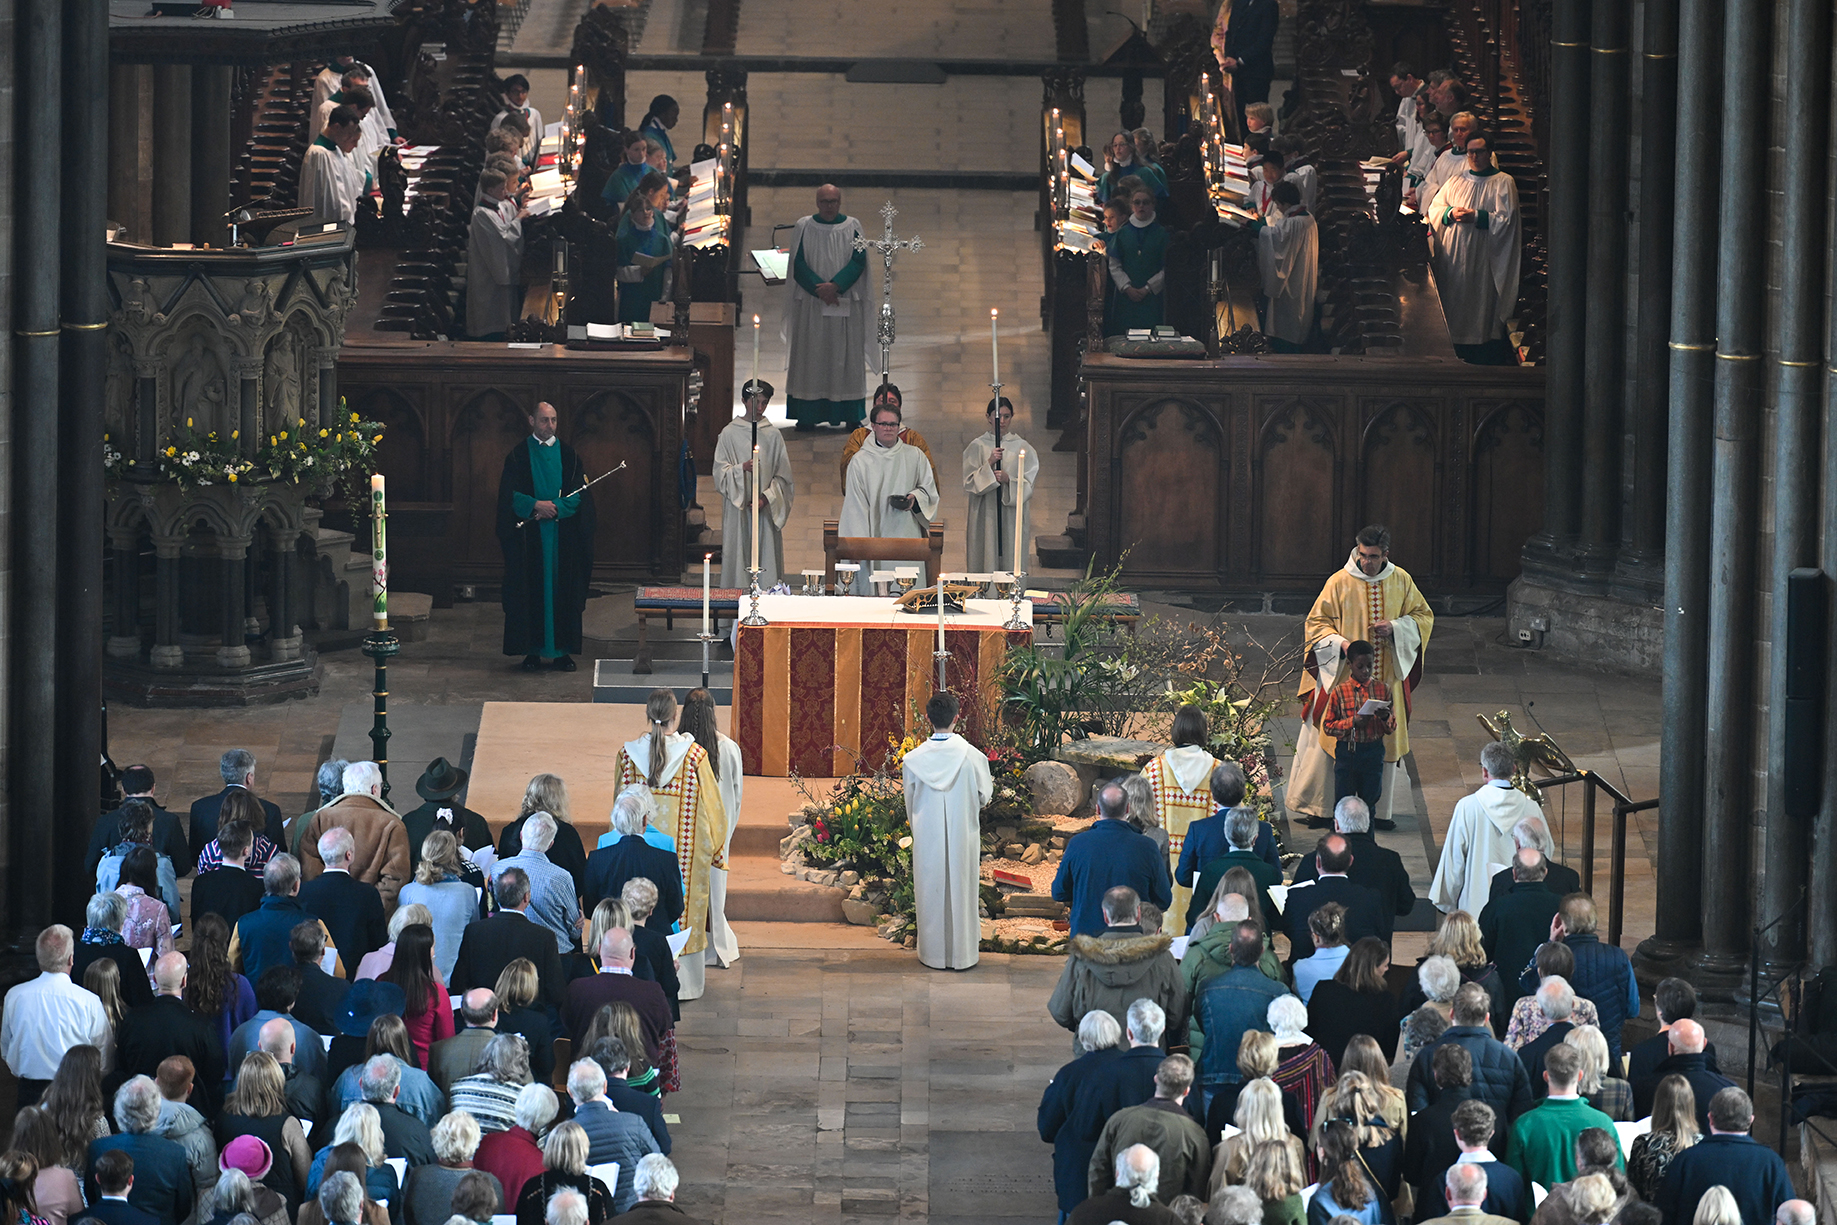 Full congregation in the Nave of Salisbury Cathedral on the Eucharist